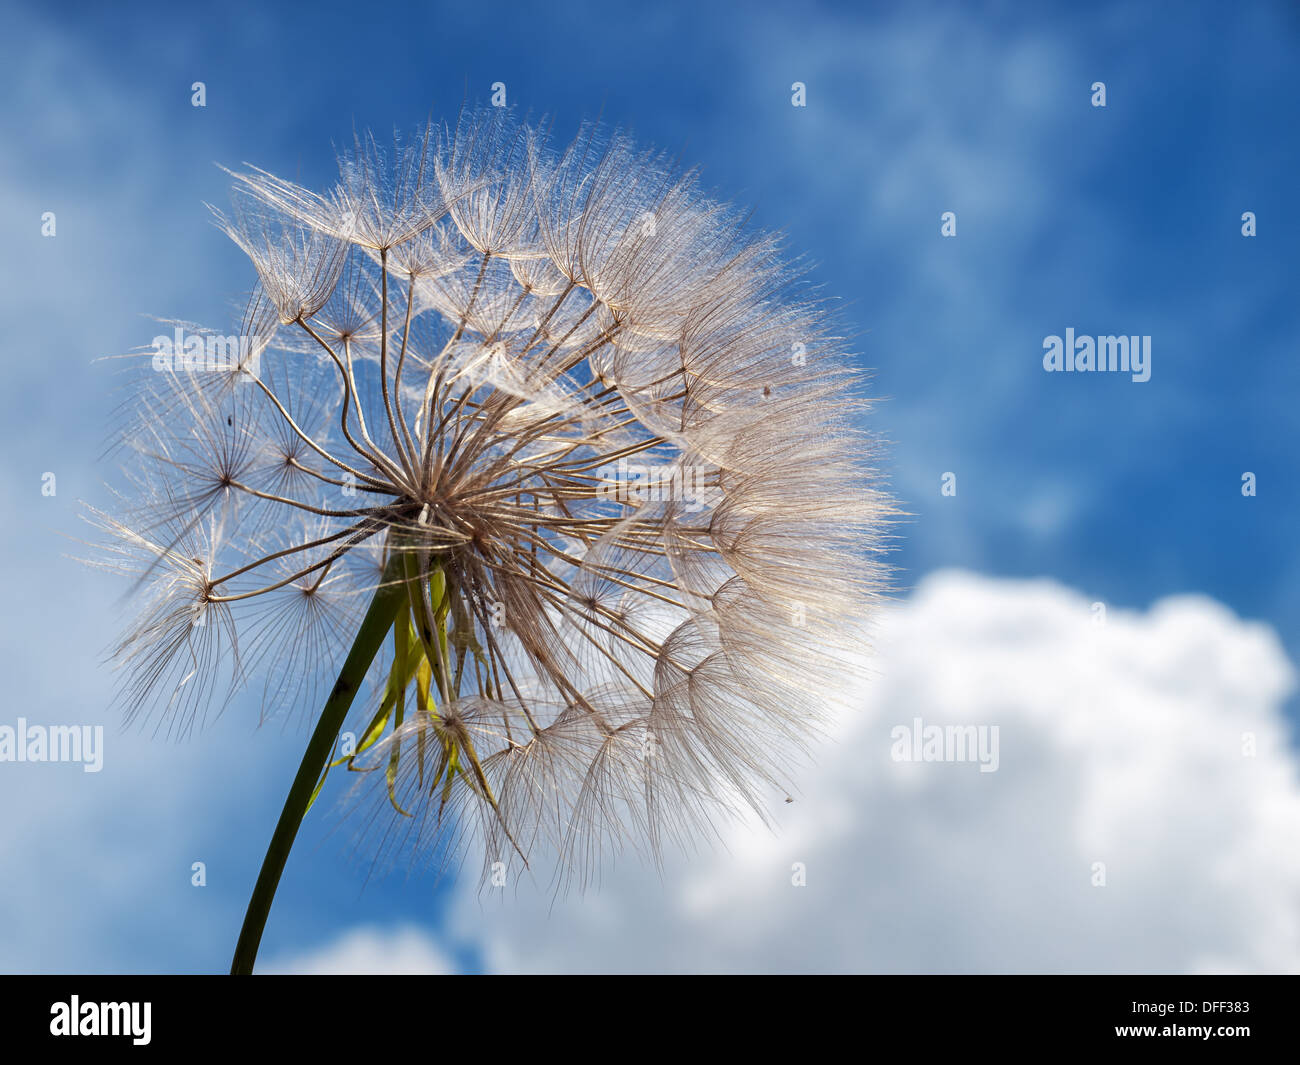 Dandelion and clouds with blue sky in the background. Stock Photo